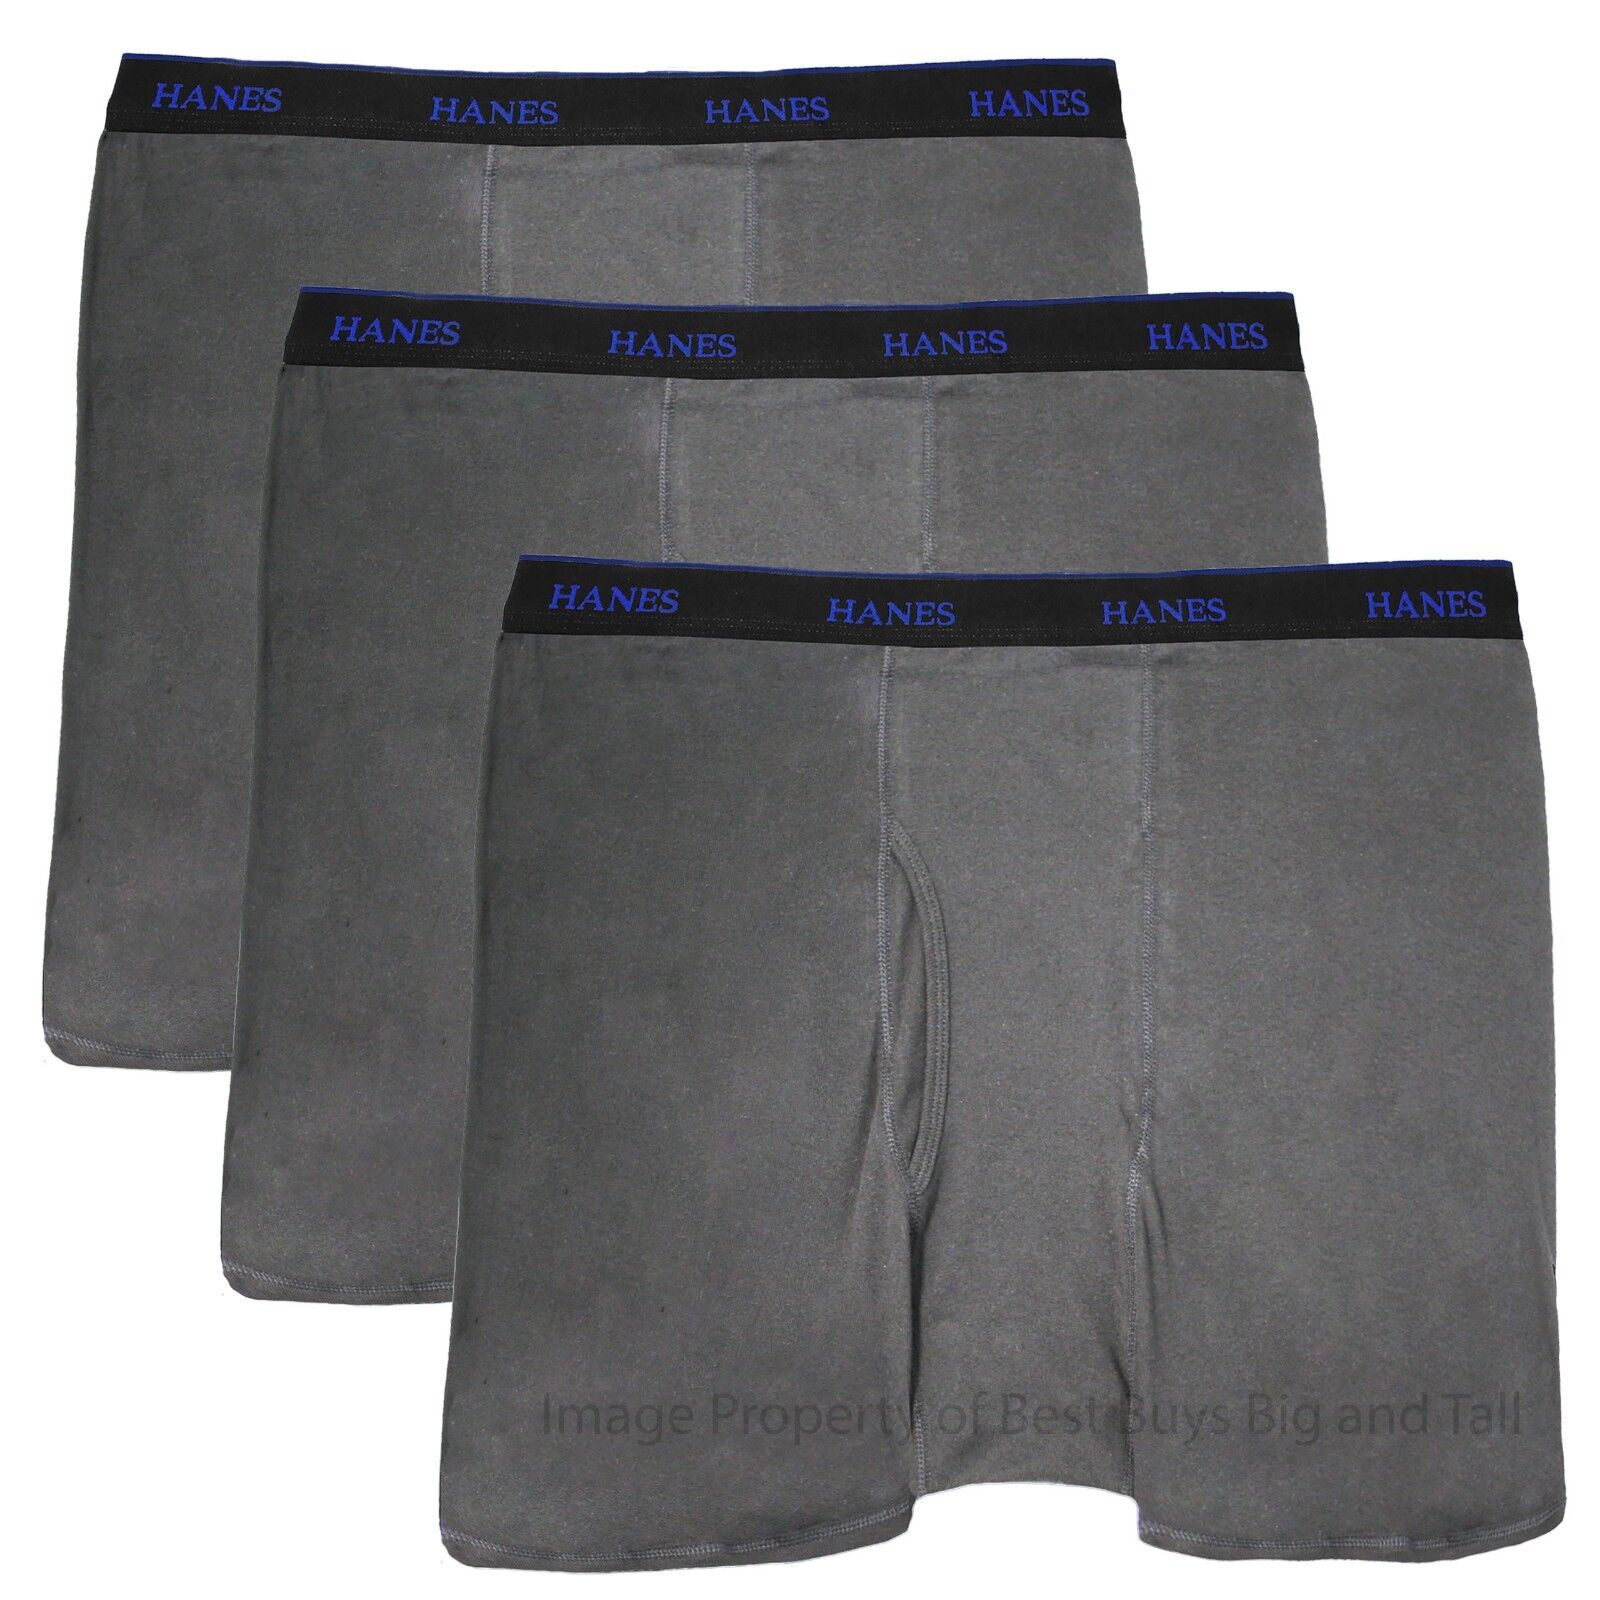 Big Import amp; Tall Underwear Cheap mail order sales Cotton Blend 3-Pack BRIEFS BOXER 2 GRAY